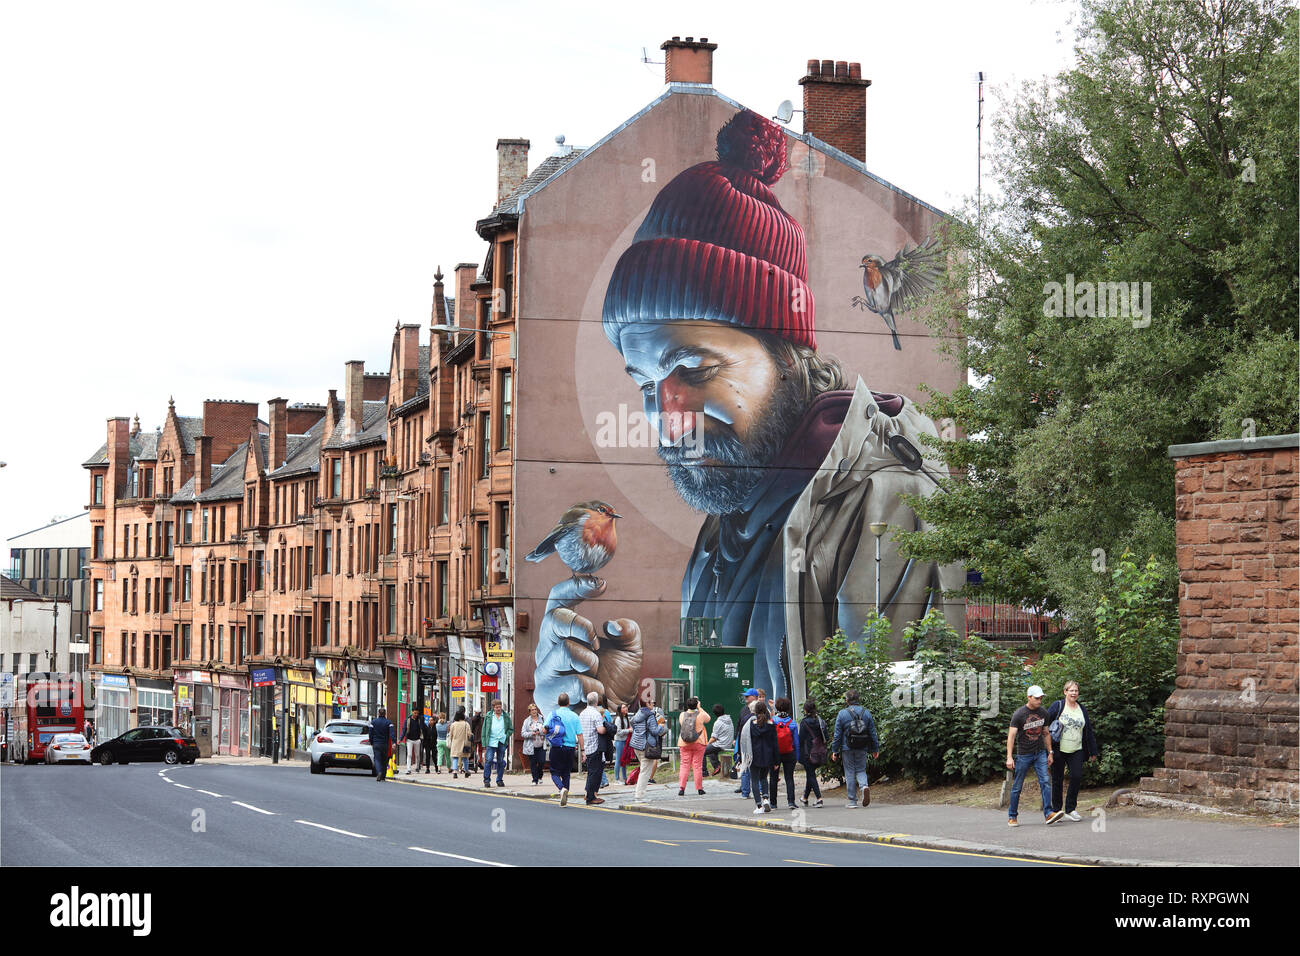 Mural on High St. by street artist Sam Bates, aka Smug, depicting St. Mungo the patron saint and founder of the City of Glasgow, Scotland Stock Photo